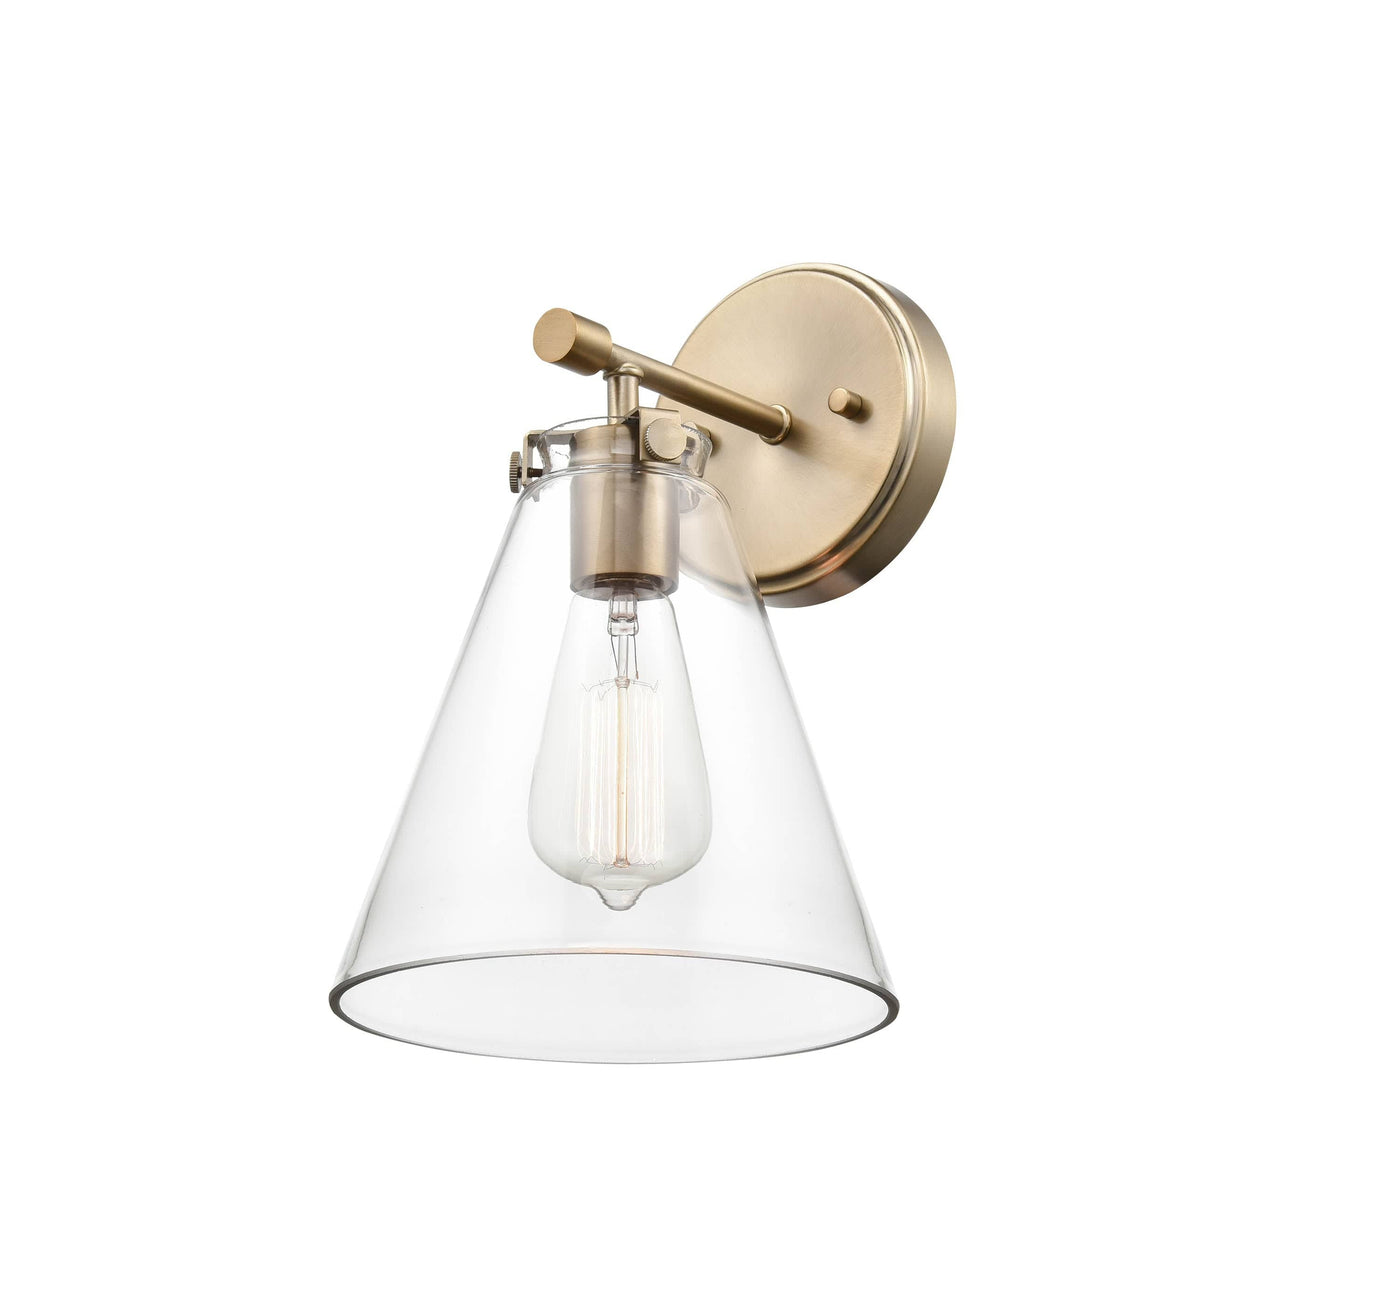 B&p Lamp Make-A-Lamp Kit with Clear Gold Cord